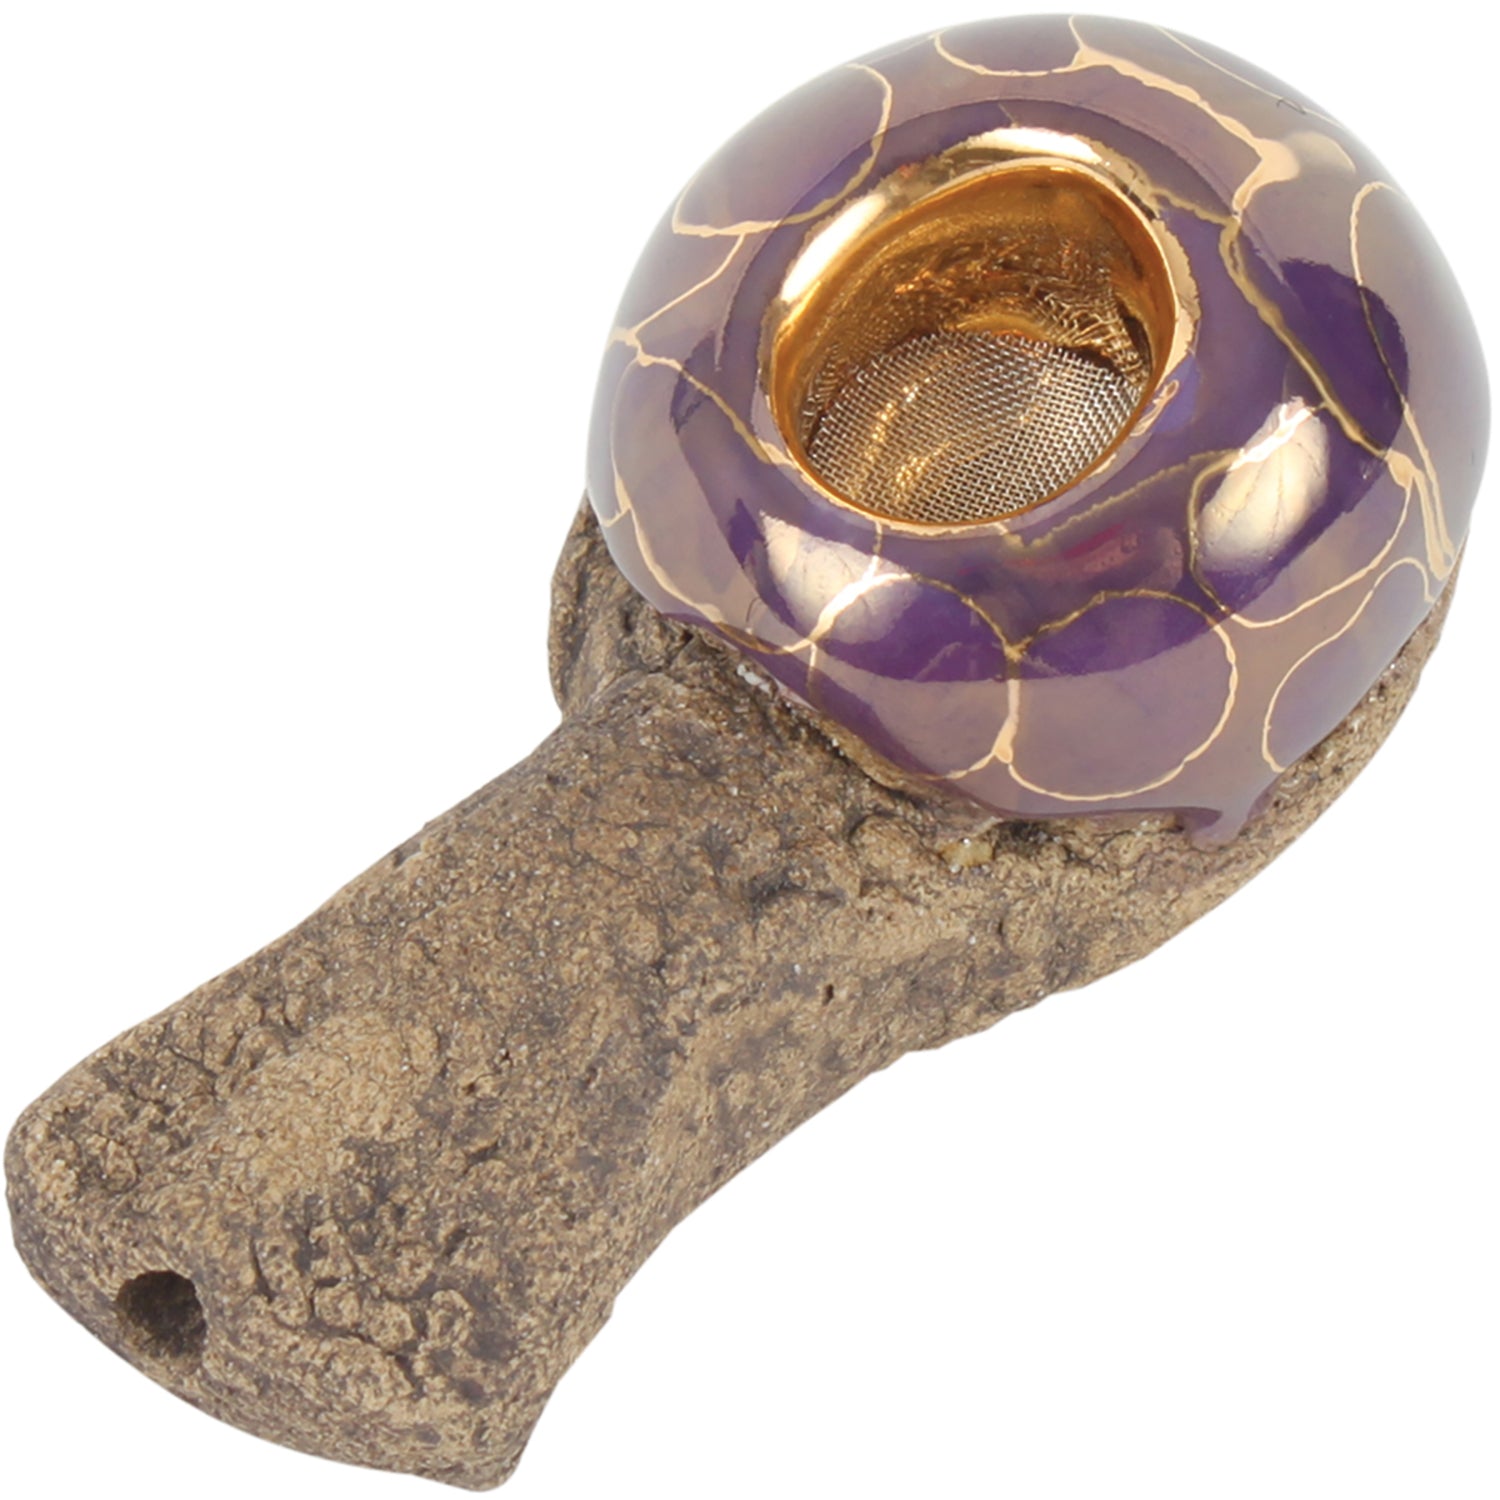 2 Pipes   4oz Kleen Green Gold - Celebration Pipes